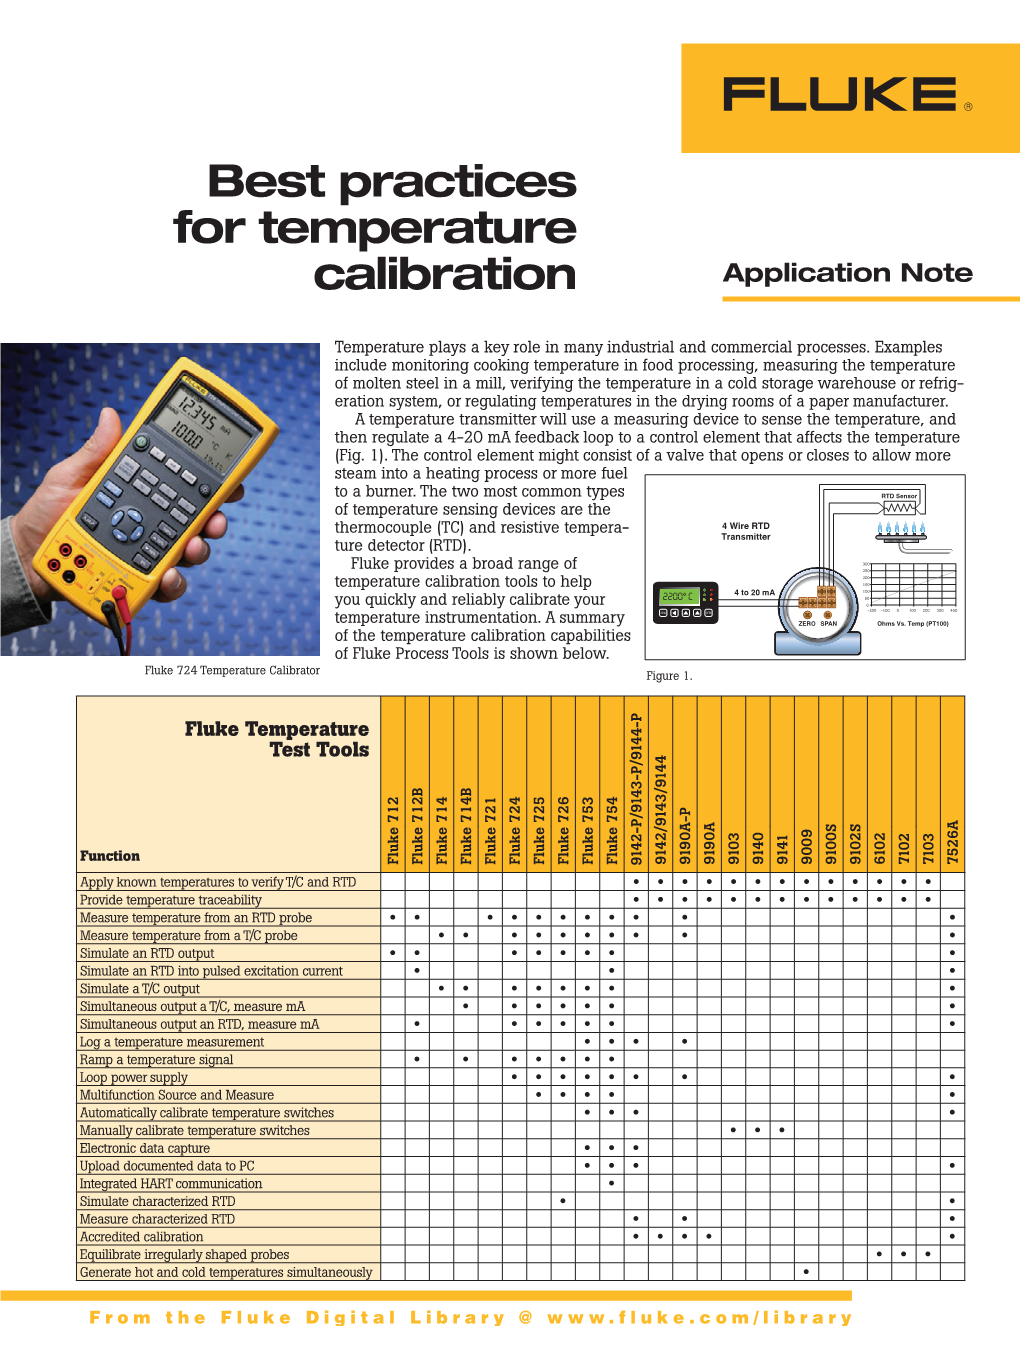 Best Practices for Temperature Calibration Application Note